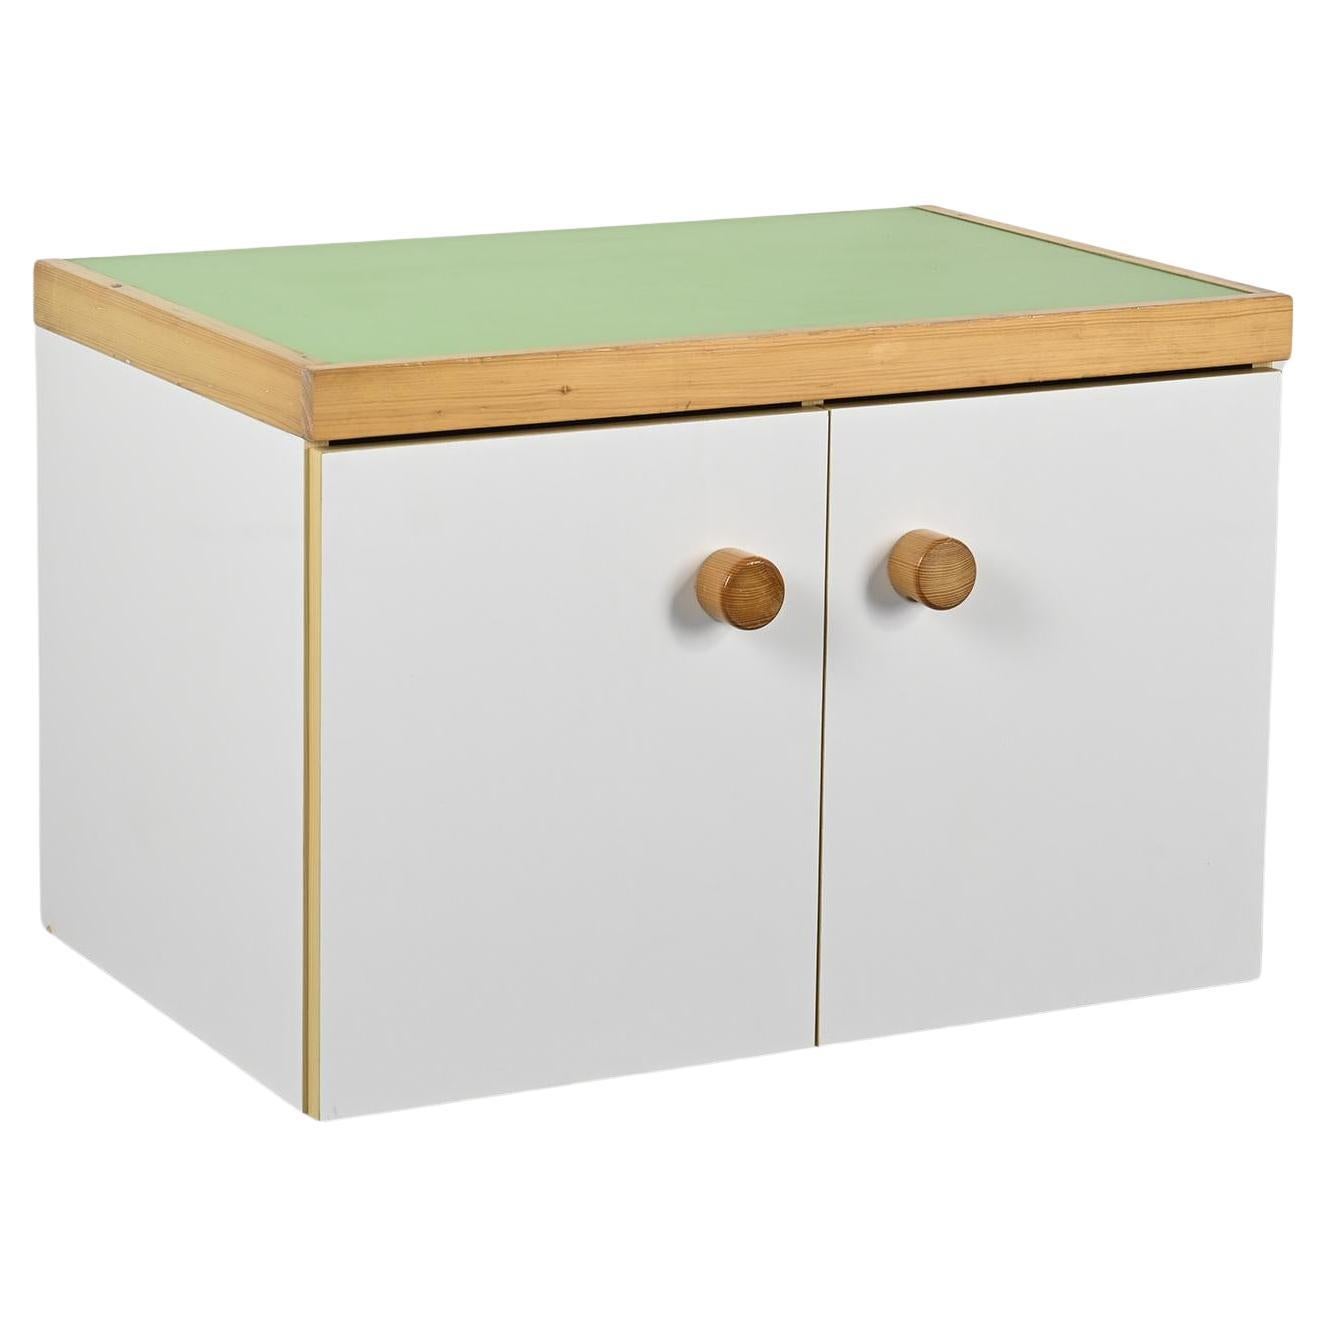 Two-door Sideboard from Les Arcs by Charlotte Perriand